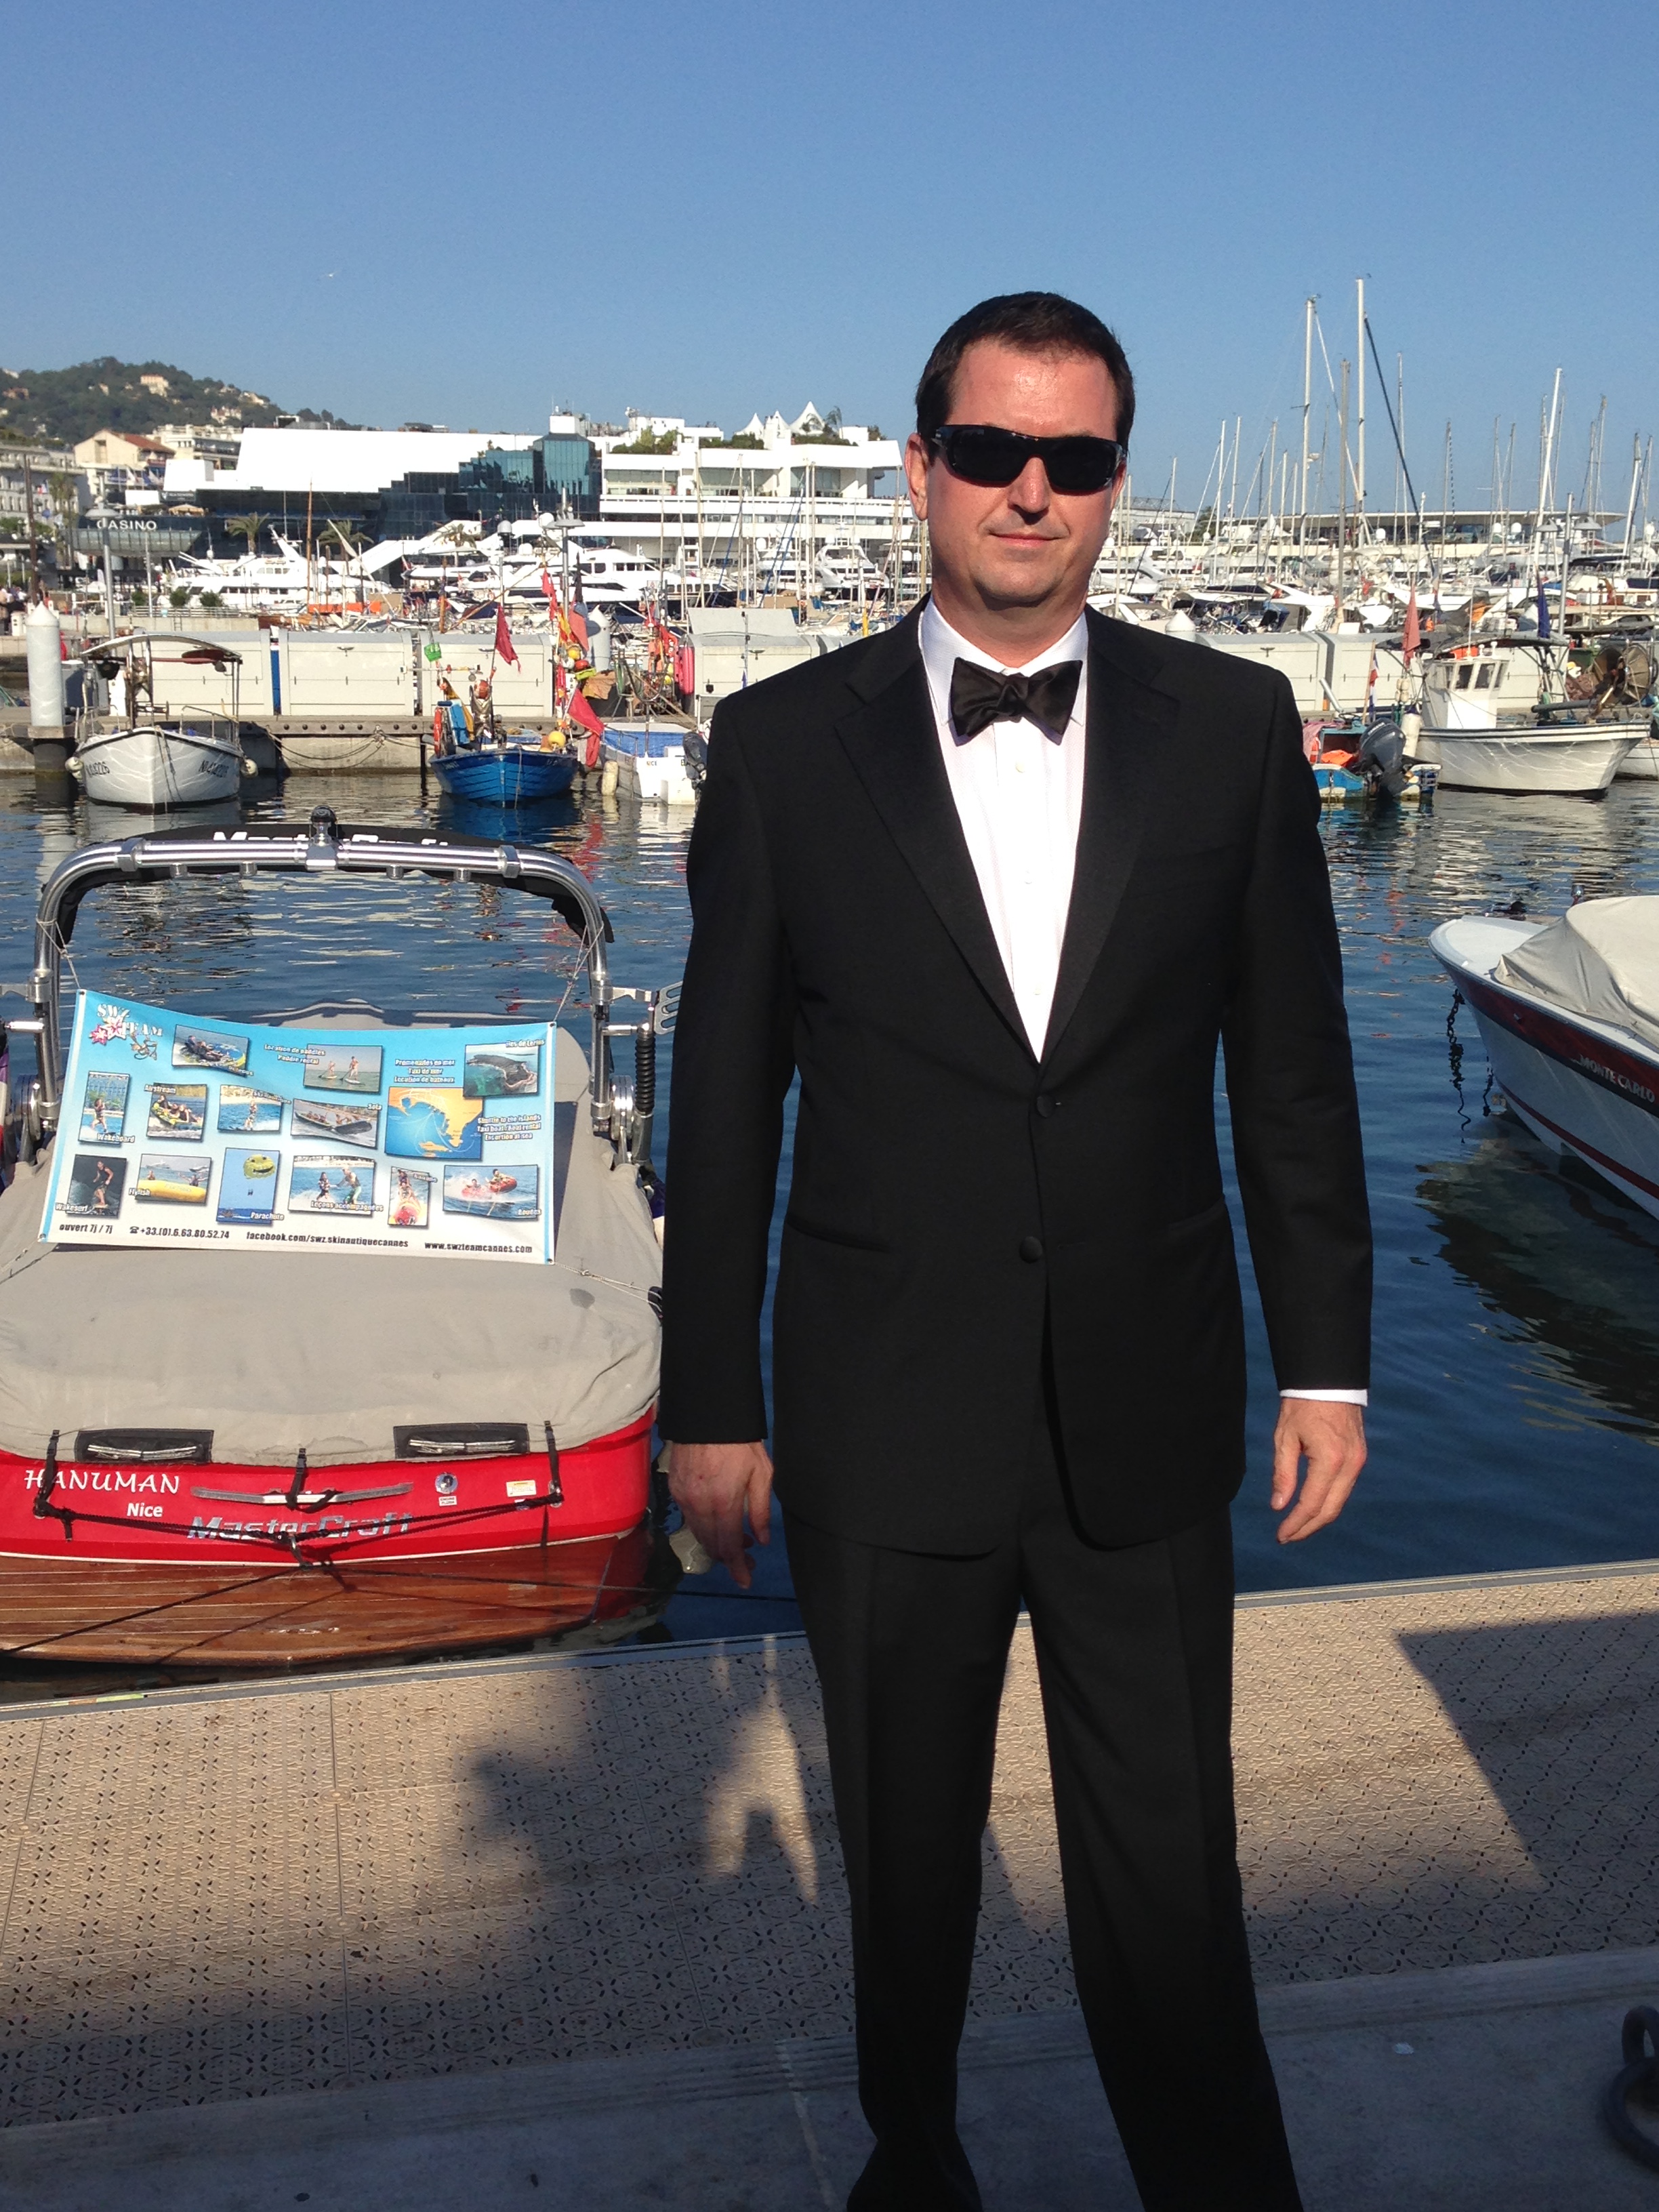 Cannes 2015